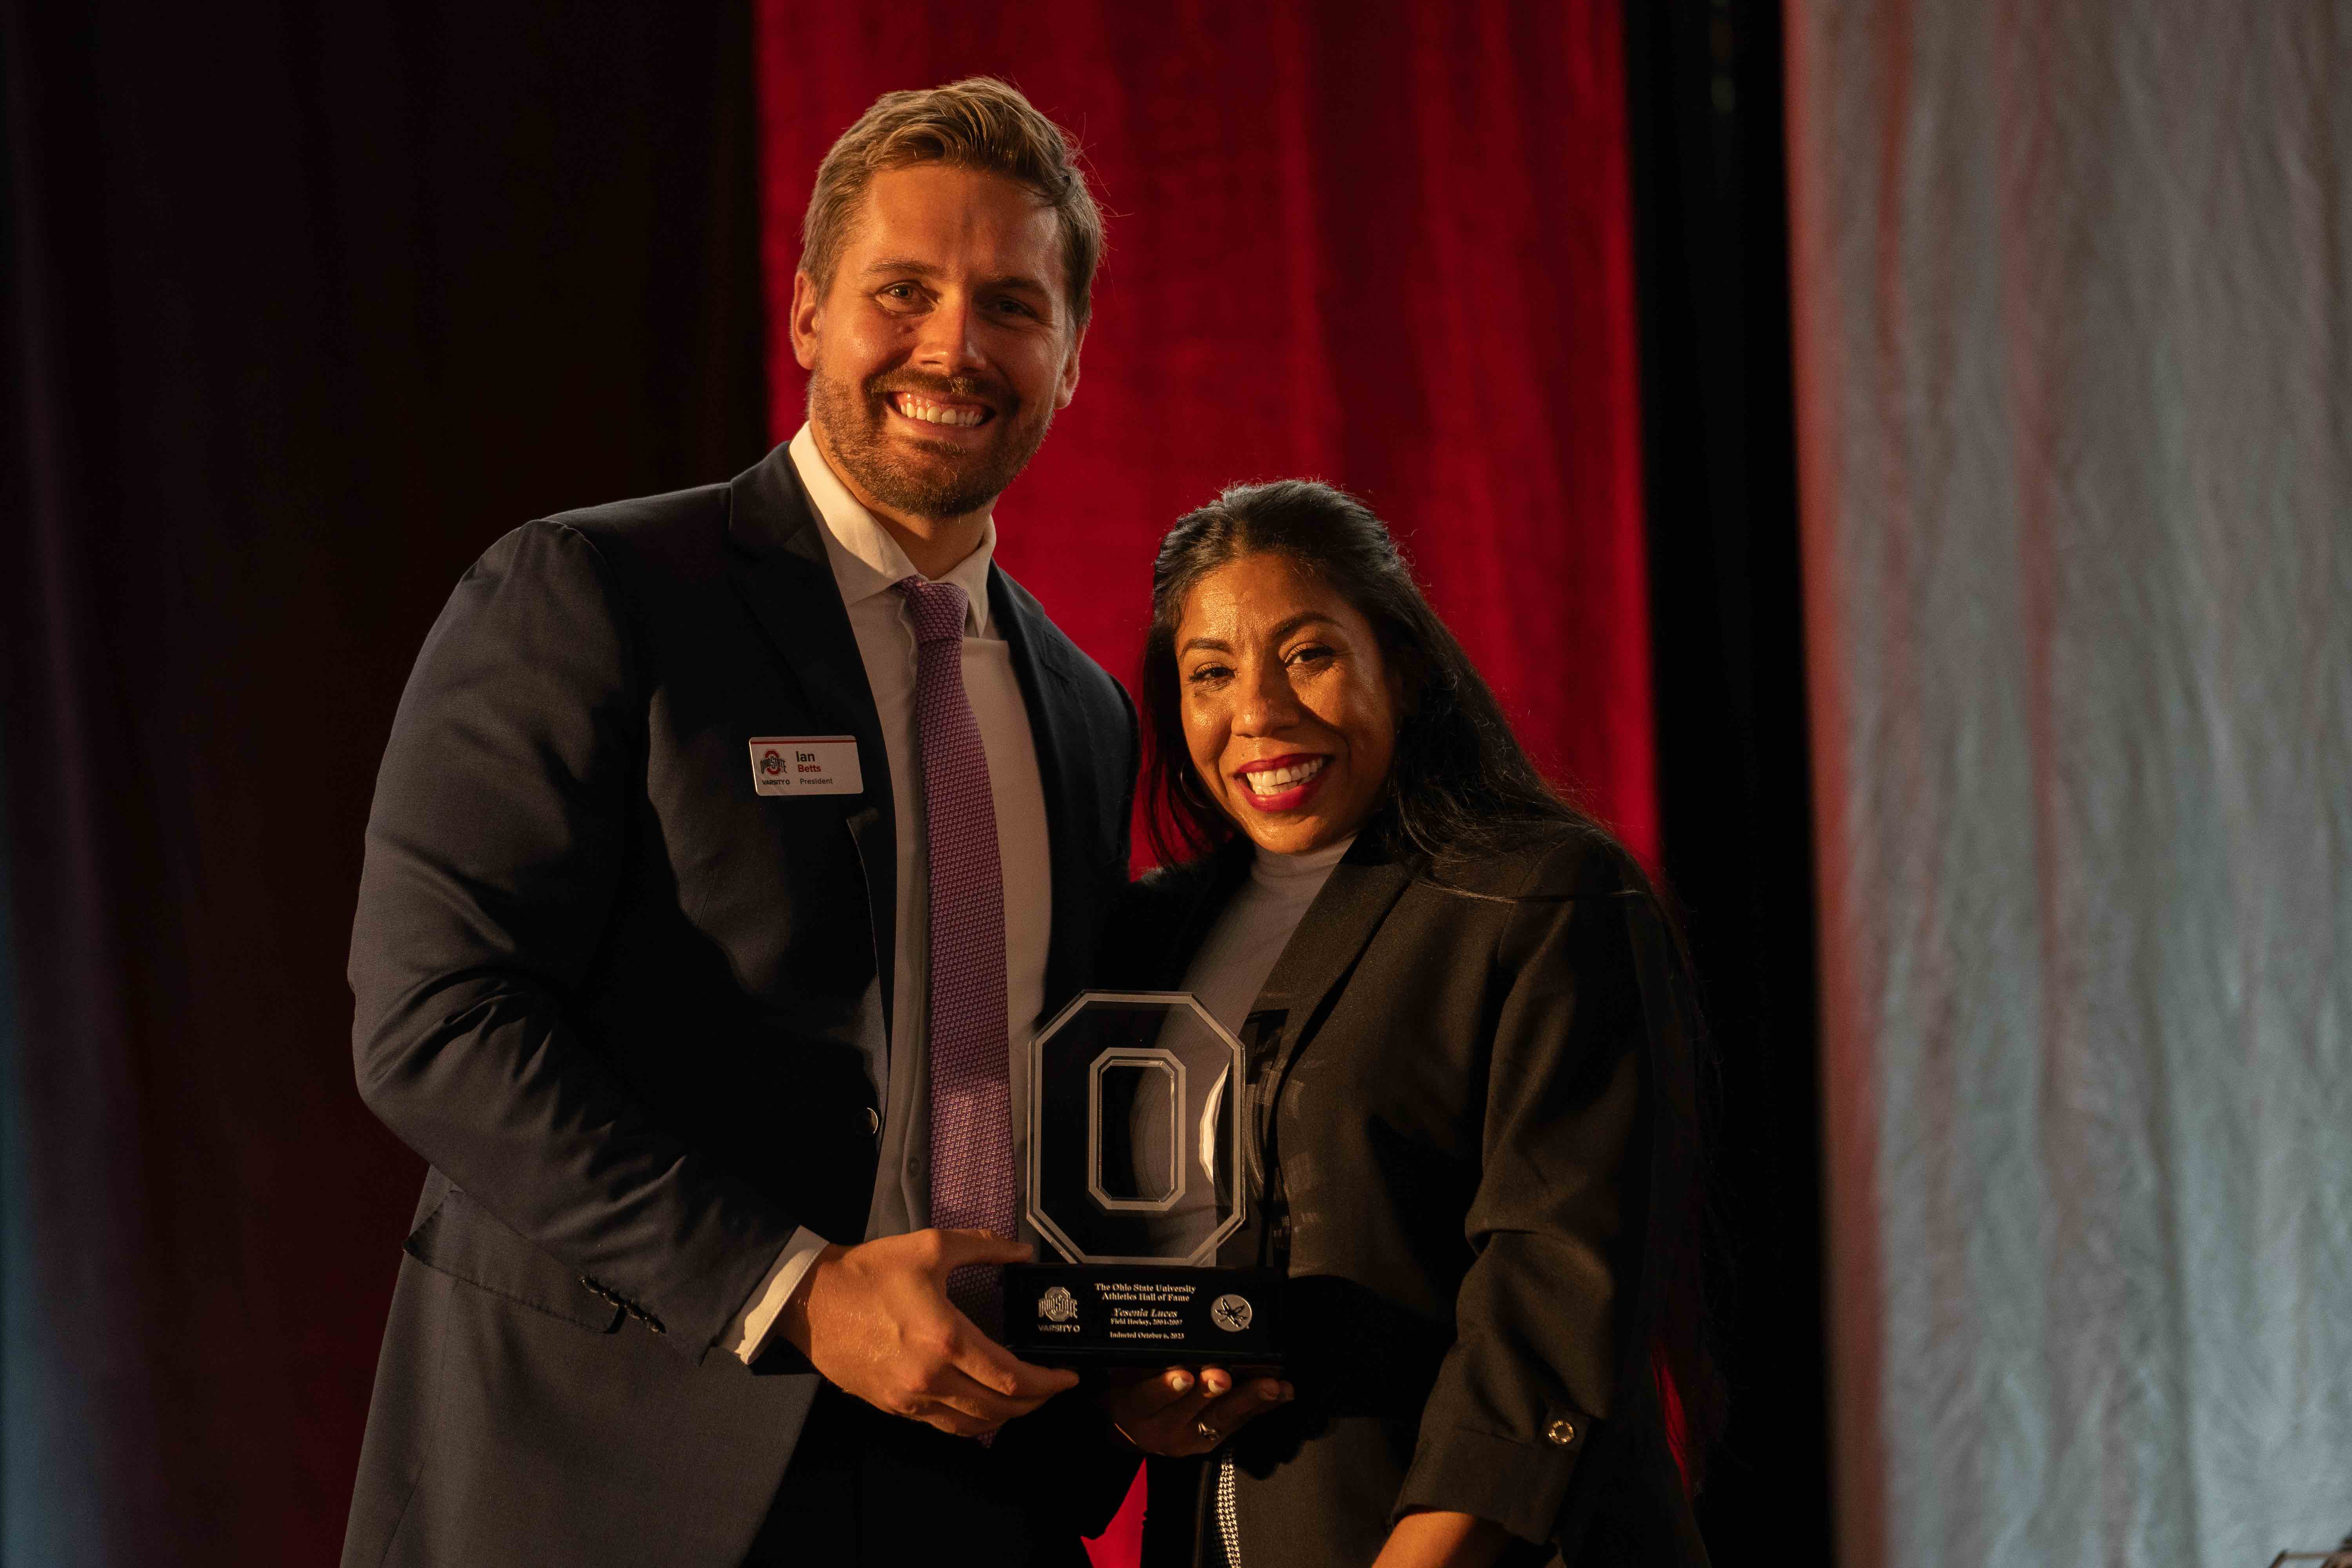 Luces receiving Ohio State Hall of Fame award at a banquet